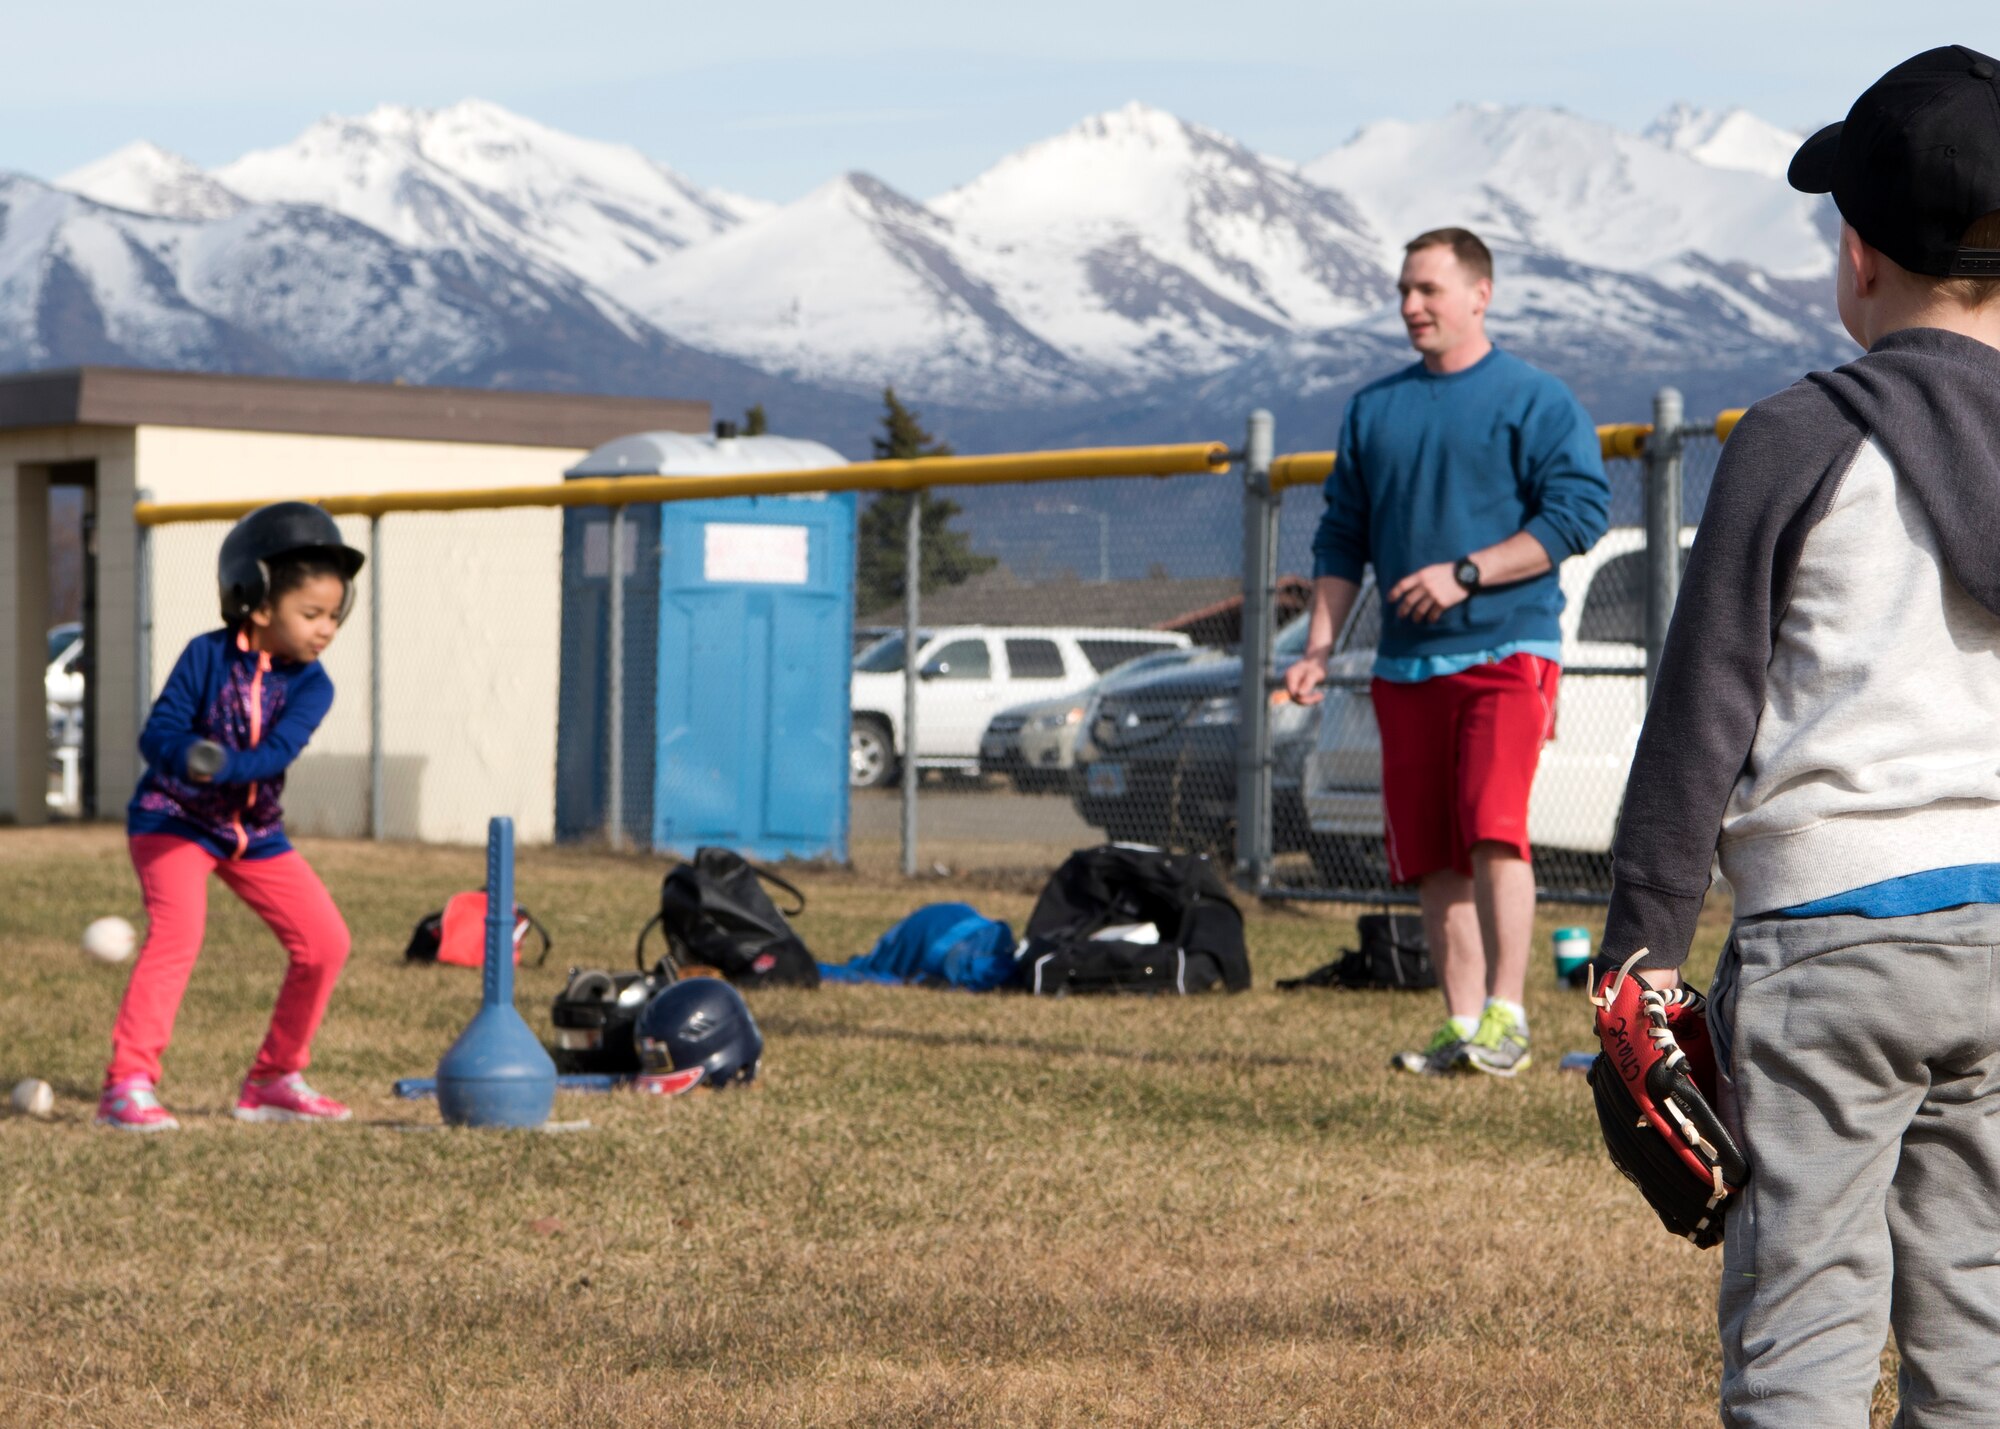 Chase, age 5, son of Air Force Maj. Jeff Van Horn, 732nd Aircraft Maintenance Squadron director of operations, listens to coaching while learning about playing an outfield position at Joint Base Elmendorf-Richardson, Alaska, May 7, 2018. JBER Youth Sports Program abides by the National Alliance for Youth Sports-affiliated National Youth Sports Coaches Association, which provides education on topics such as the psychology of coaching youth sports, communication, child abuse, injury prevention, and nutrition and hydration, as well as skills and drills specifically applicable to each sport.